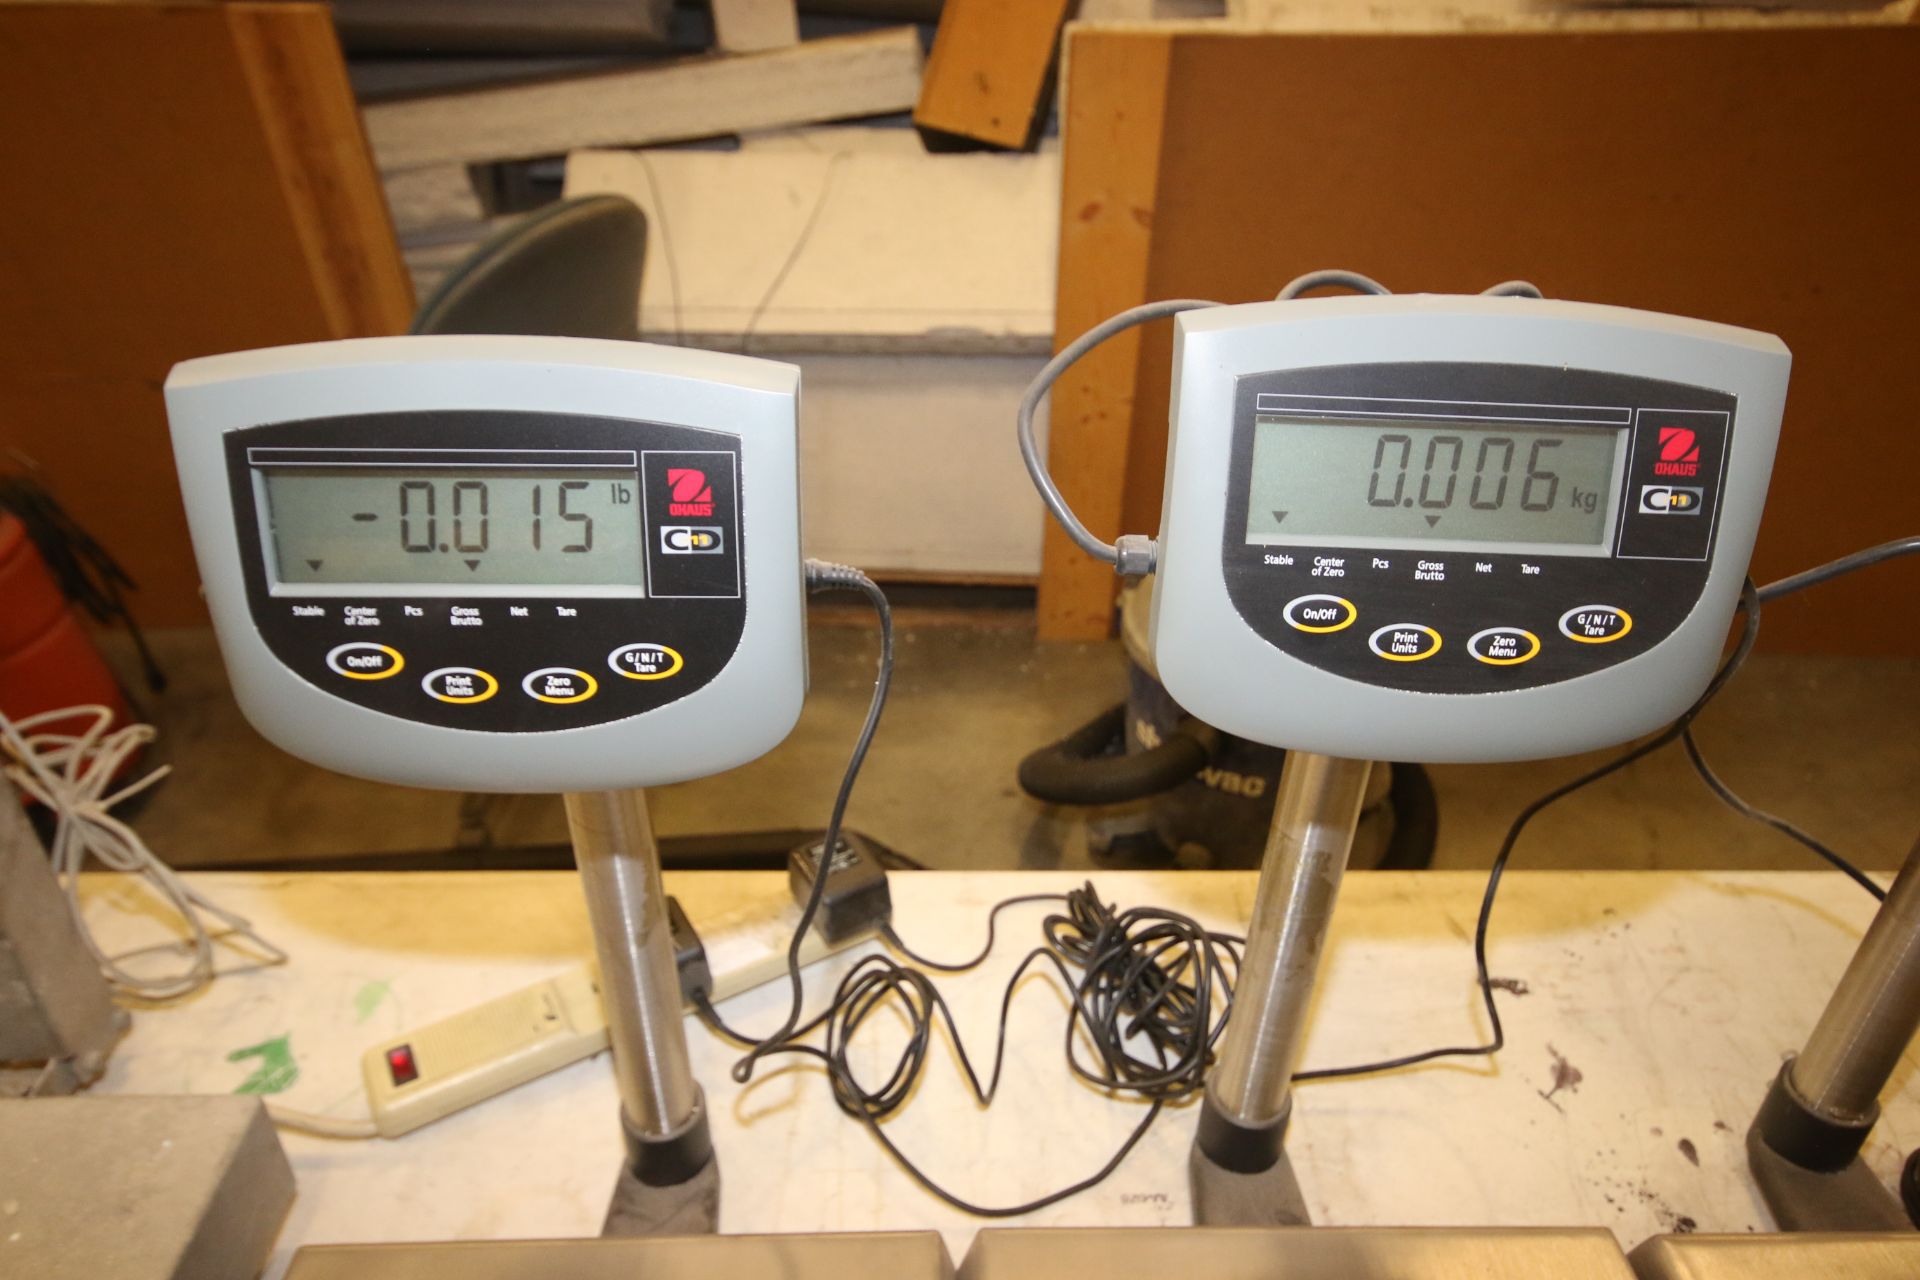 Ohaus S/S Digitial Platform Scales, M/N CD-11, with Digitial Read Outs, Platform Dims.: Aprox. 14" L - Image 3 of 3